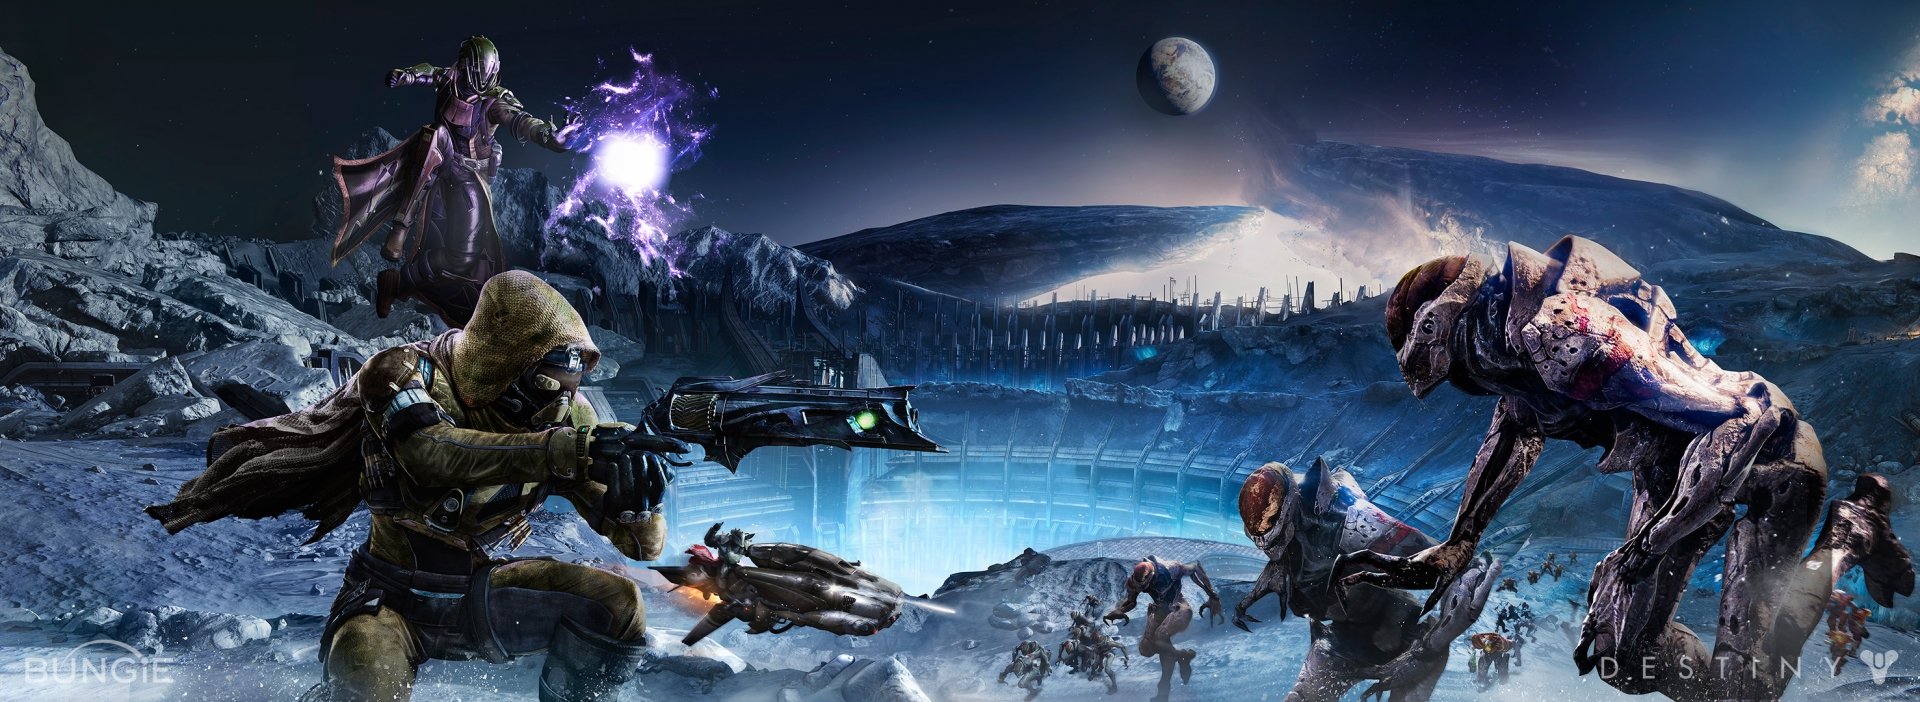 Breathtaking HD Panoramic Wallpaper For Destiny Ps4 And Xbox One